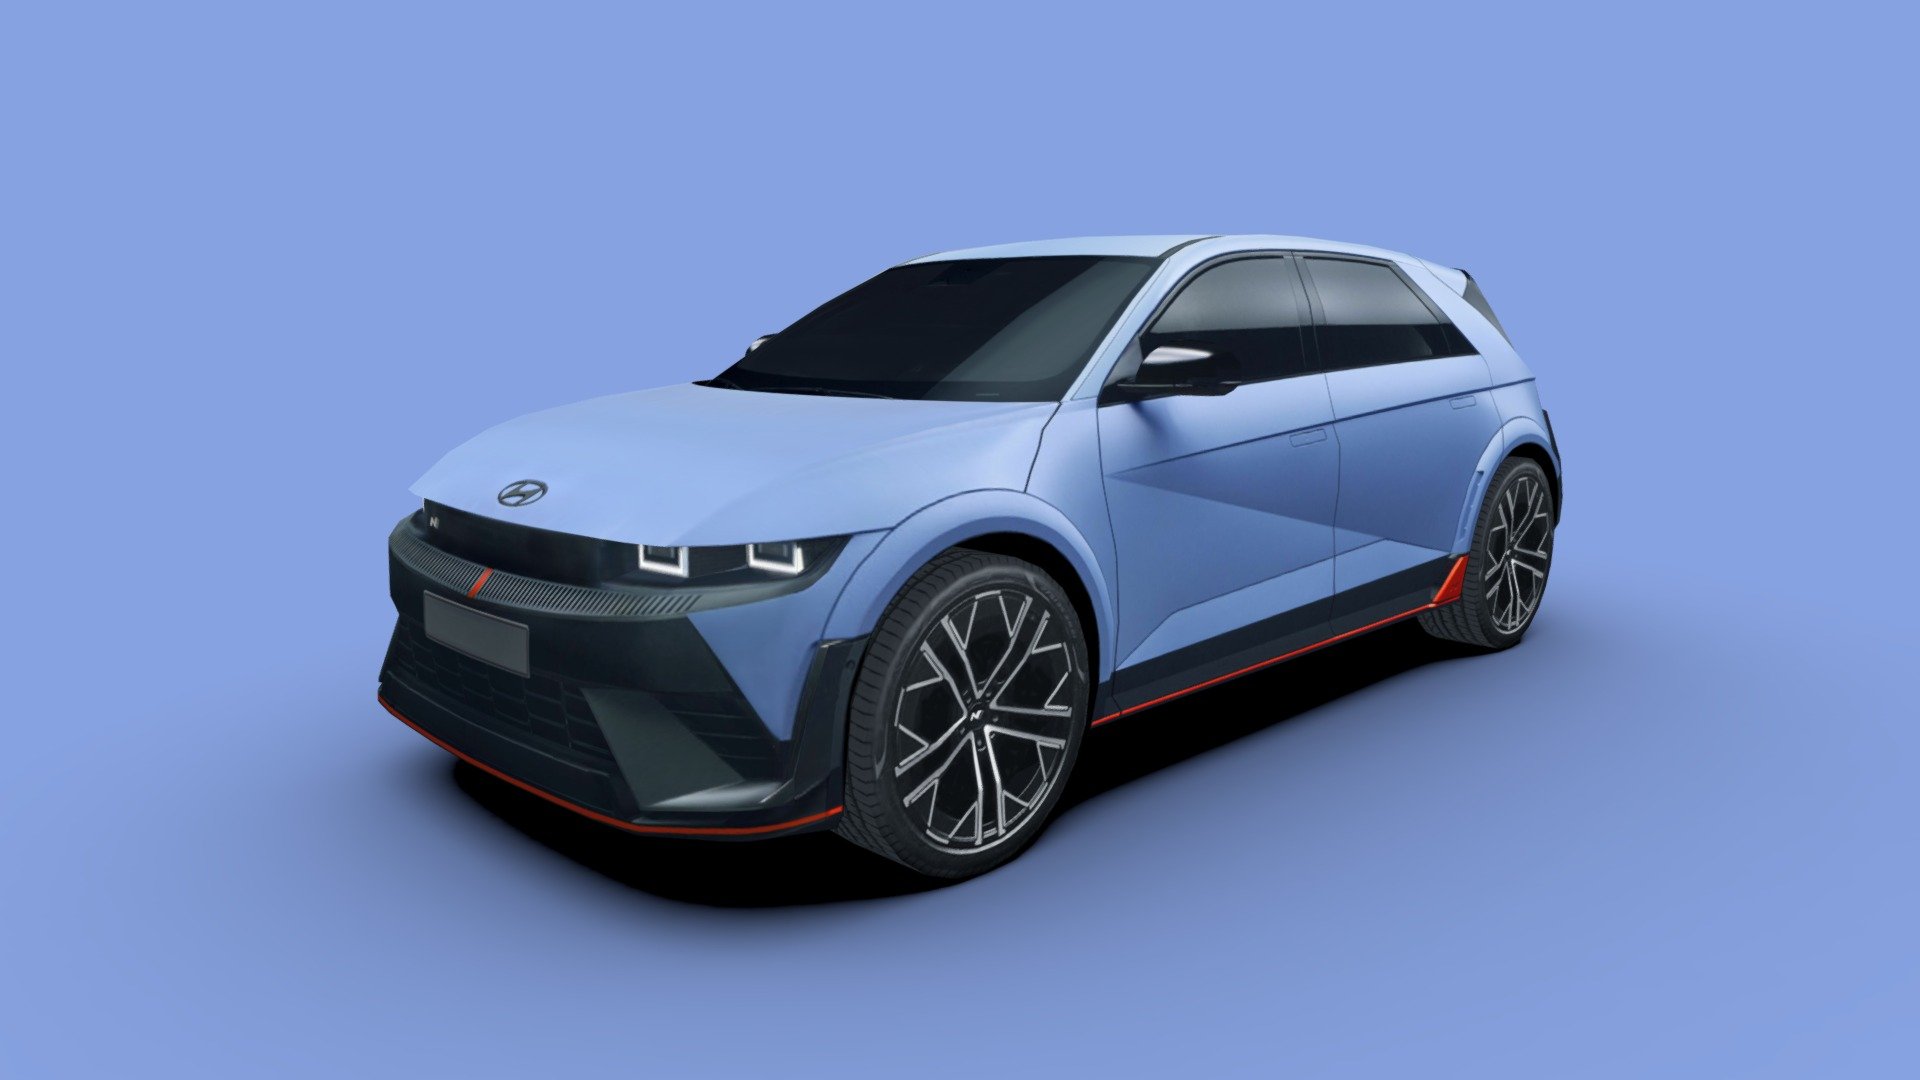 3d model of the 2024 Hyundai Ioniq 5, an all-electric, compact crossover SUV, sports car.

The model is very low-poly, full-scale, real photos texture (single 2048 x 2048 png).

Package includes 5 file formats and texture (3ds, fbx, dae, obj and skp)

Hope you enjoy it.

José Bronze - Hyundai_ Ioniq_5_N_2024_3ds - Buy Royalty Free 3D model by Jose Bronze (@pinceladas3d) 3d model